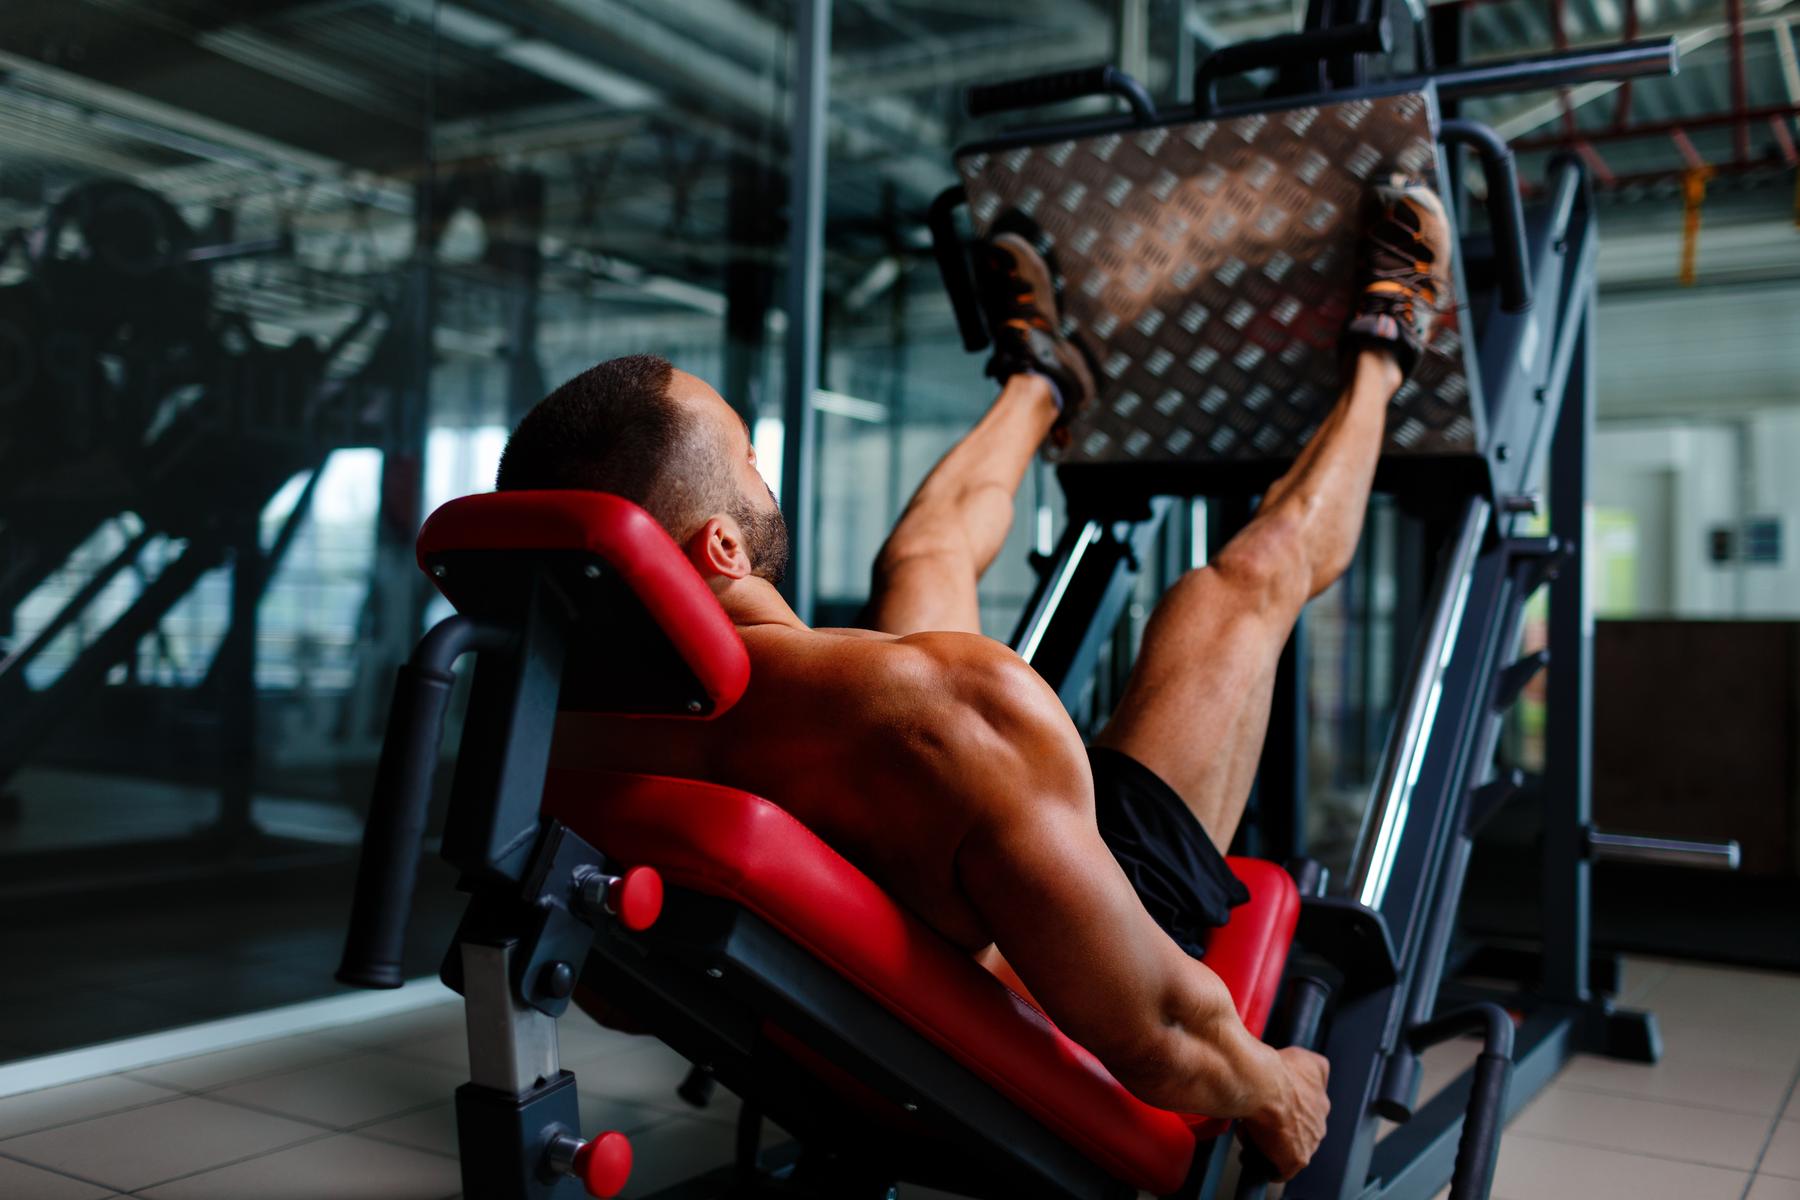 The Beginner's Guide to the Leg Press Machine